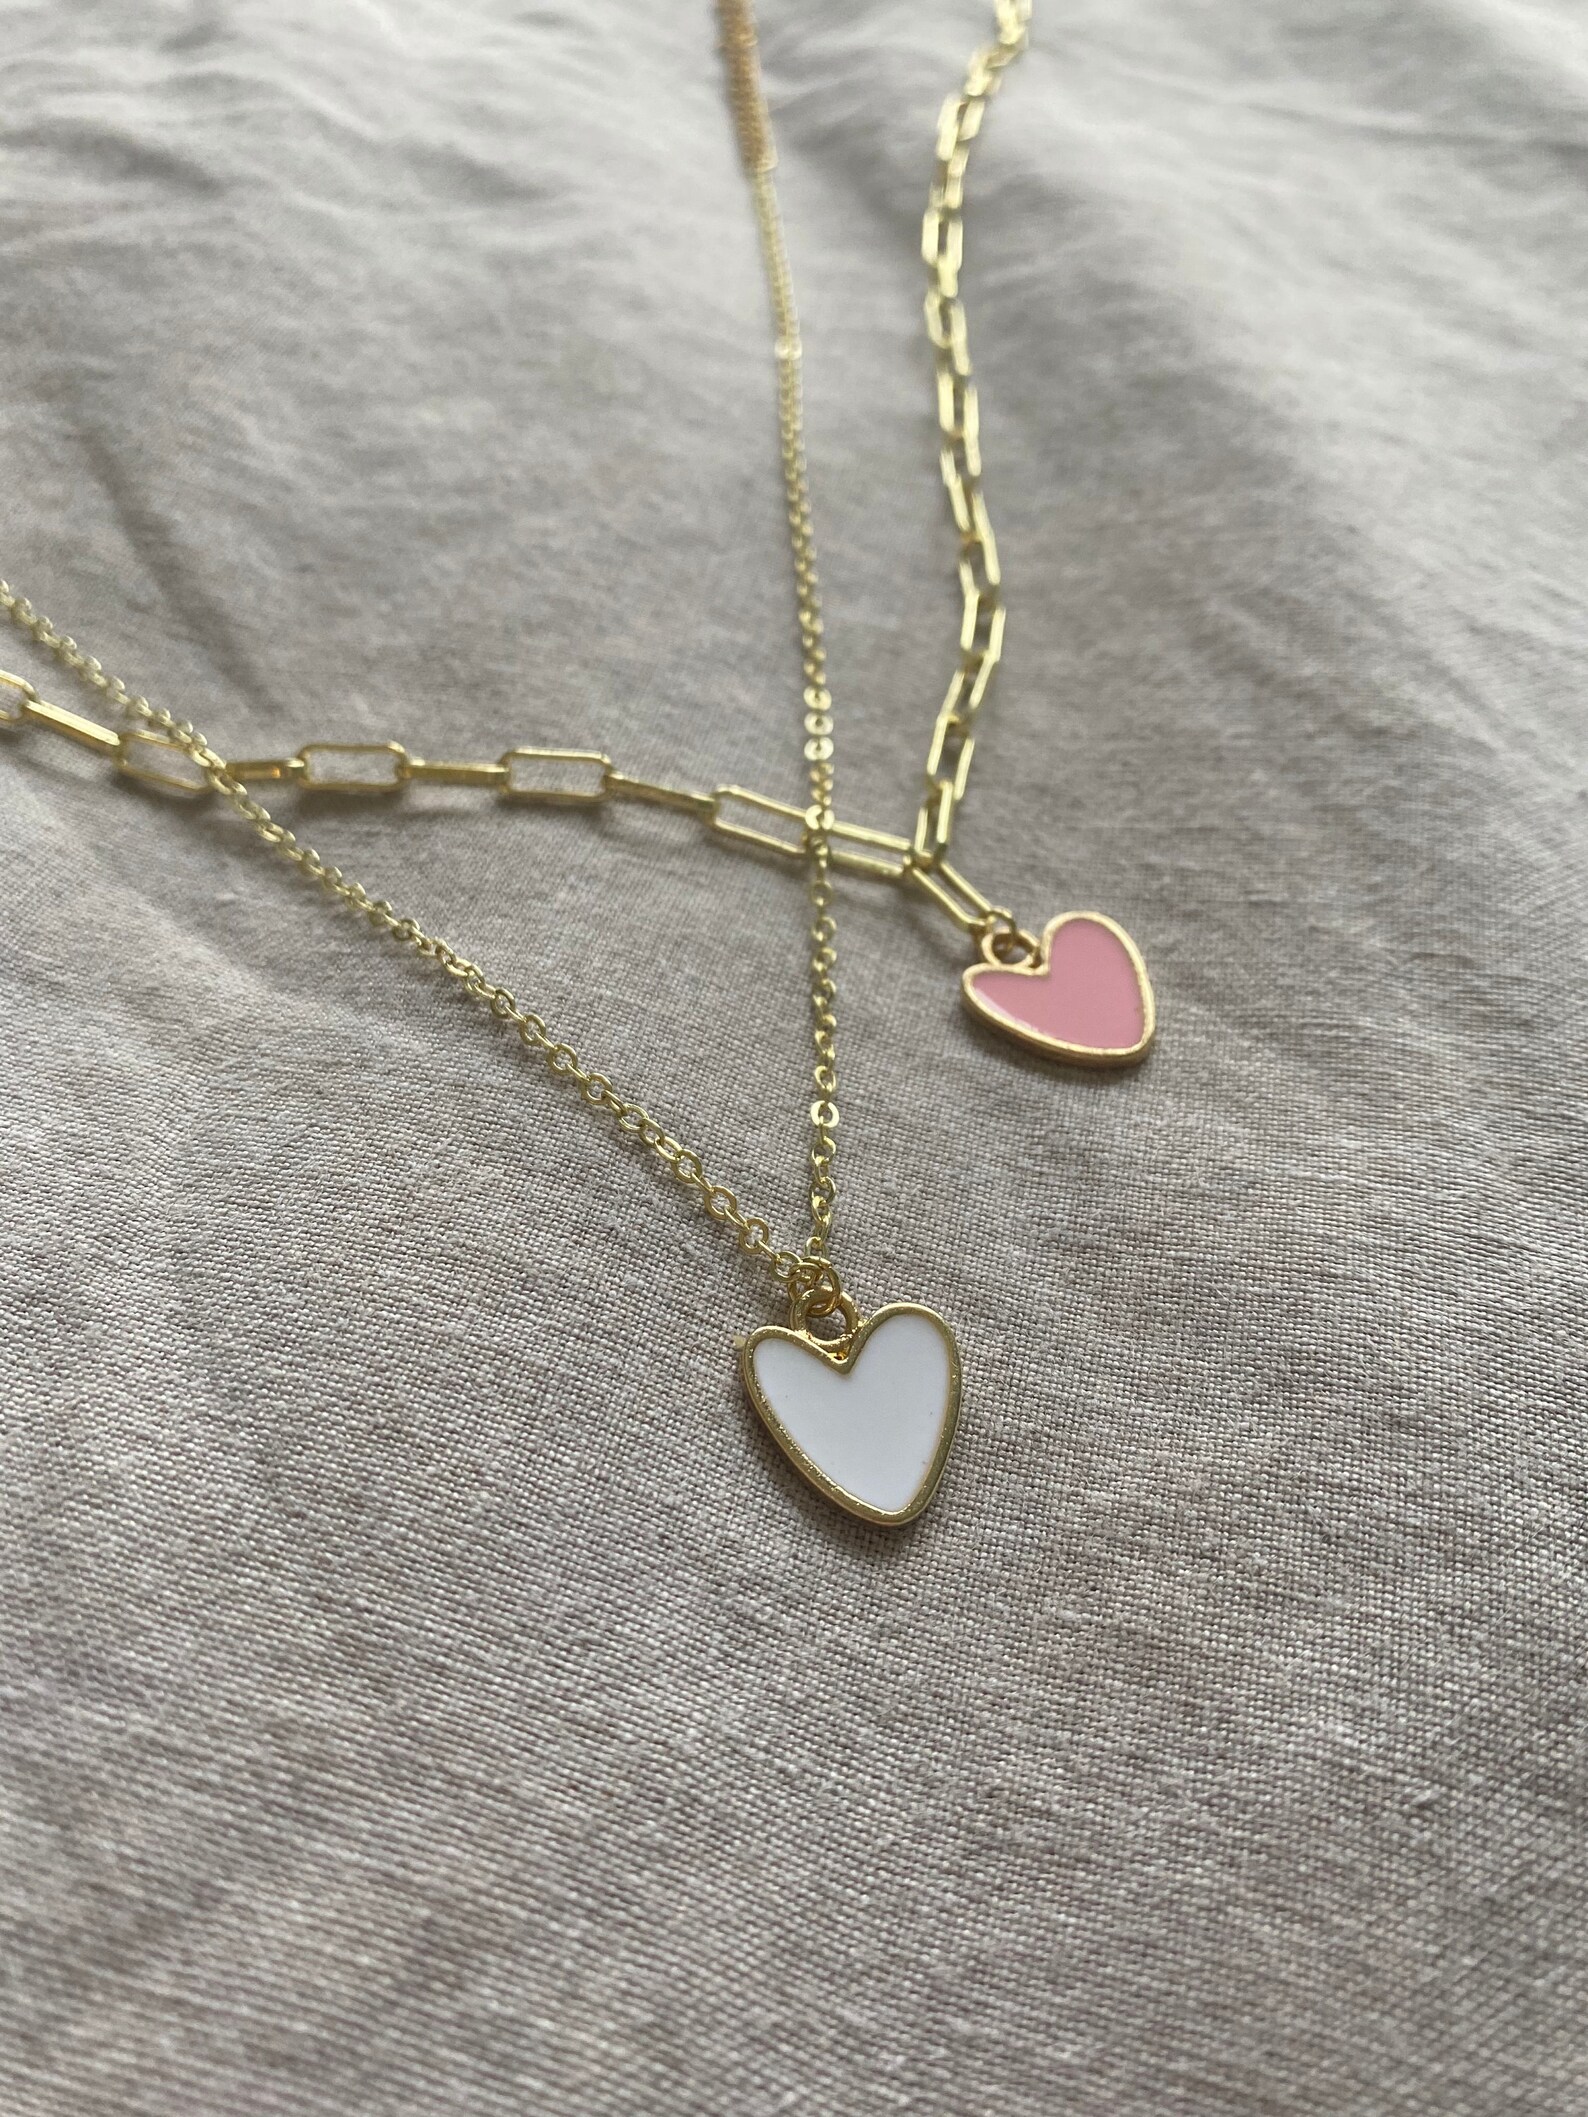 Preppy Pink and White Heart Necklace With Two Chain Options - Etsy